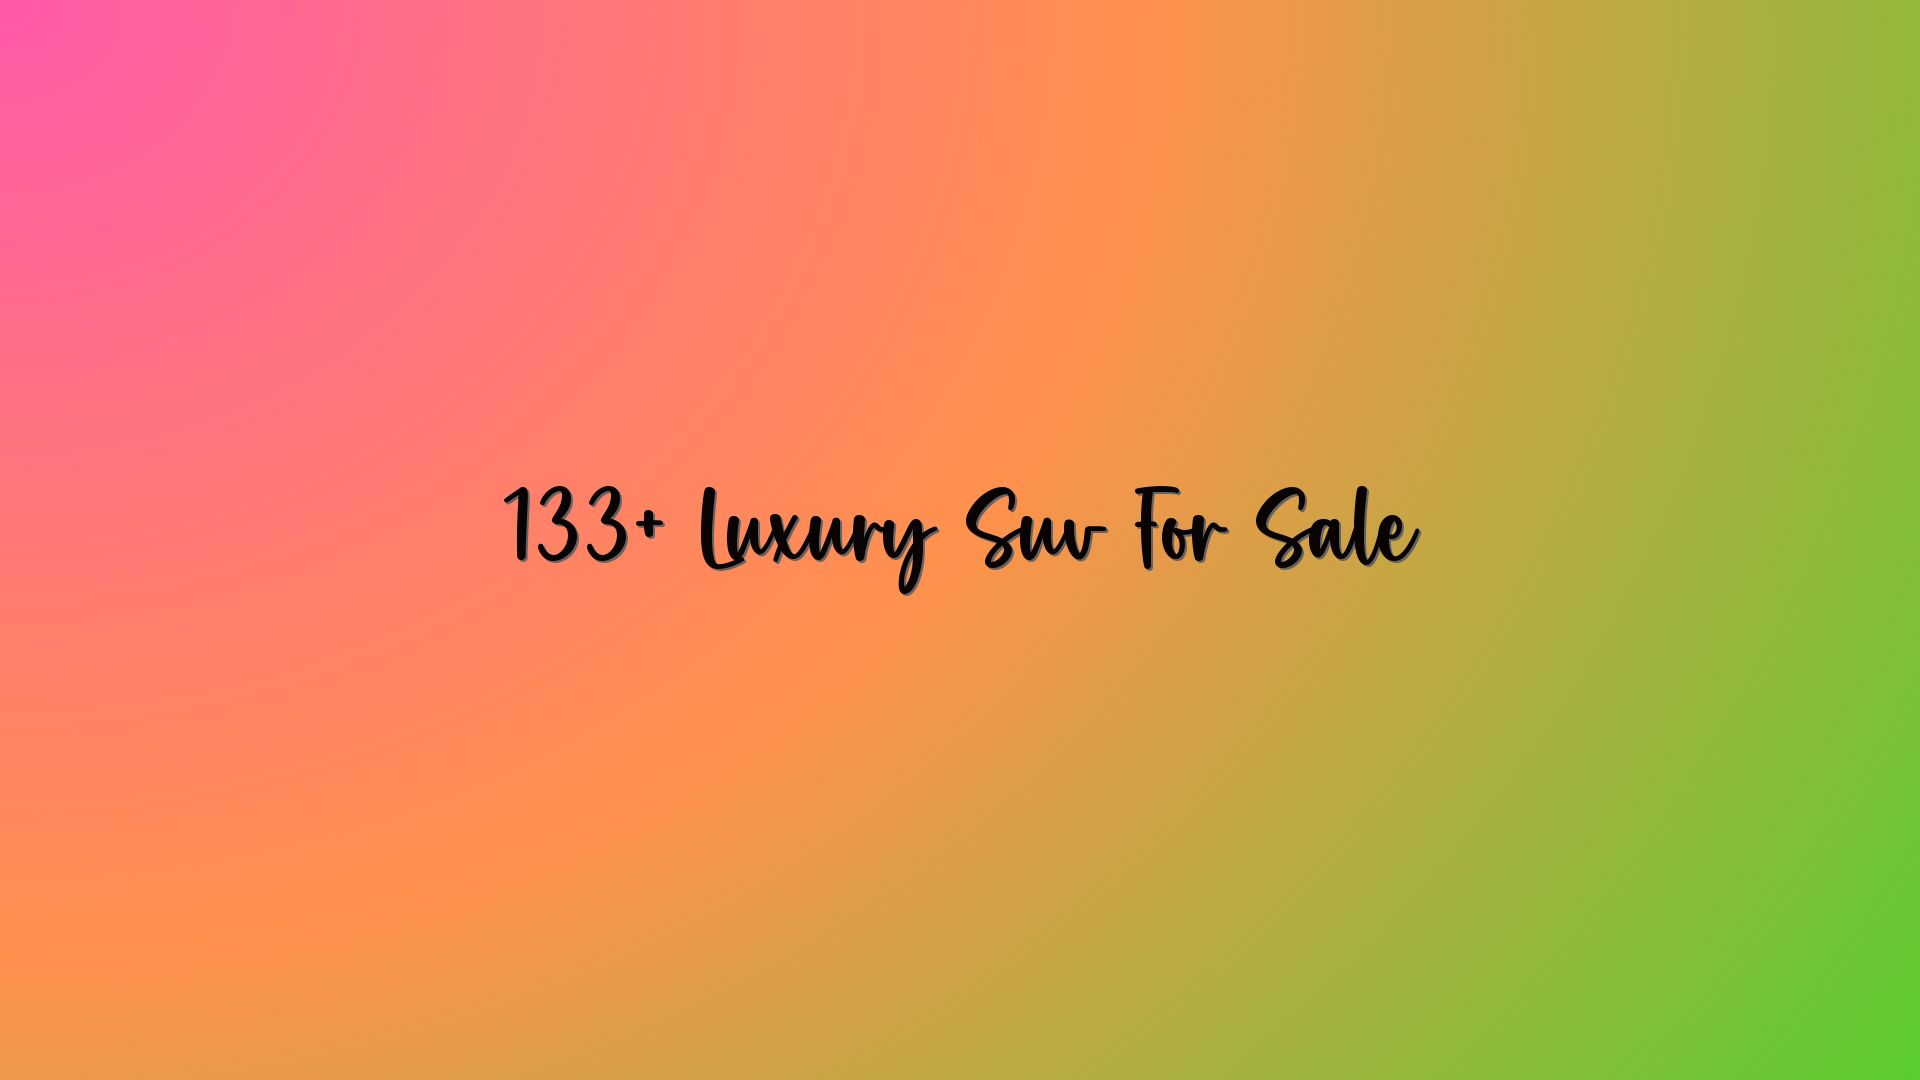 133+ Luxury Suv For Sale